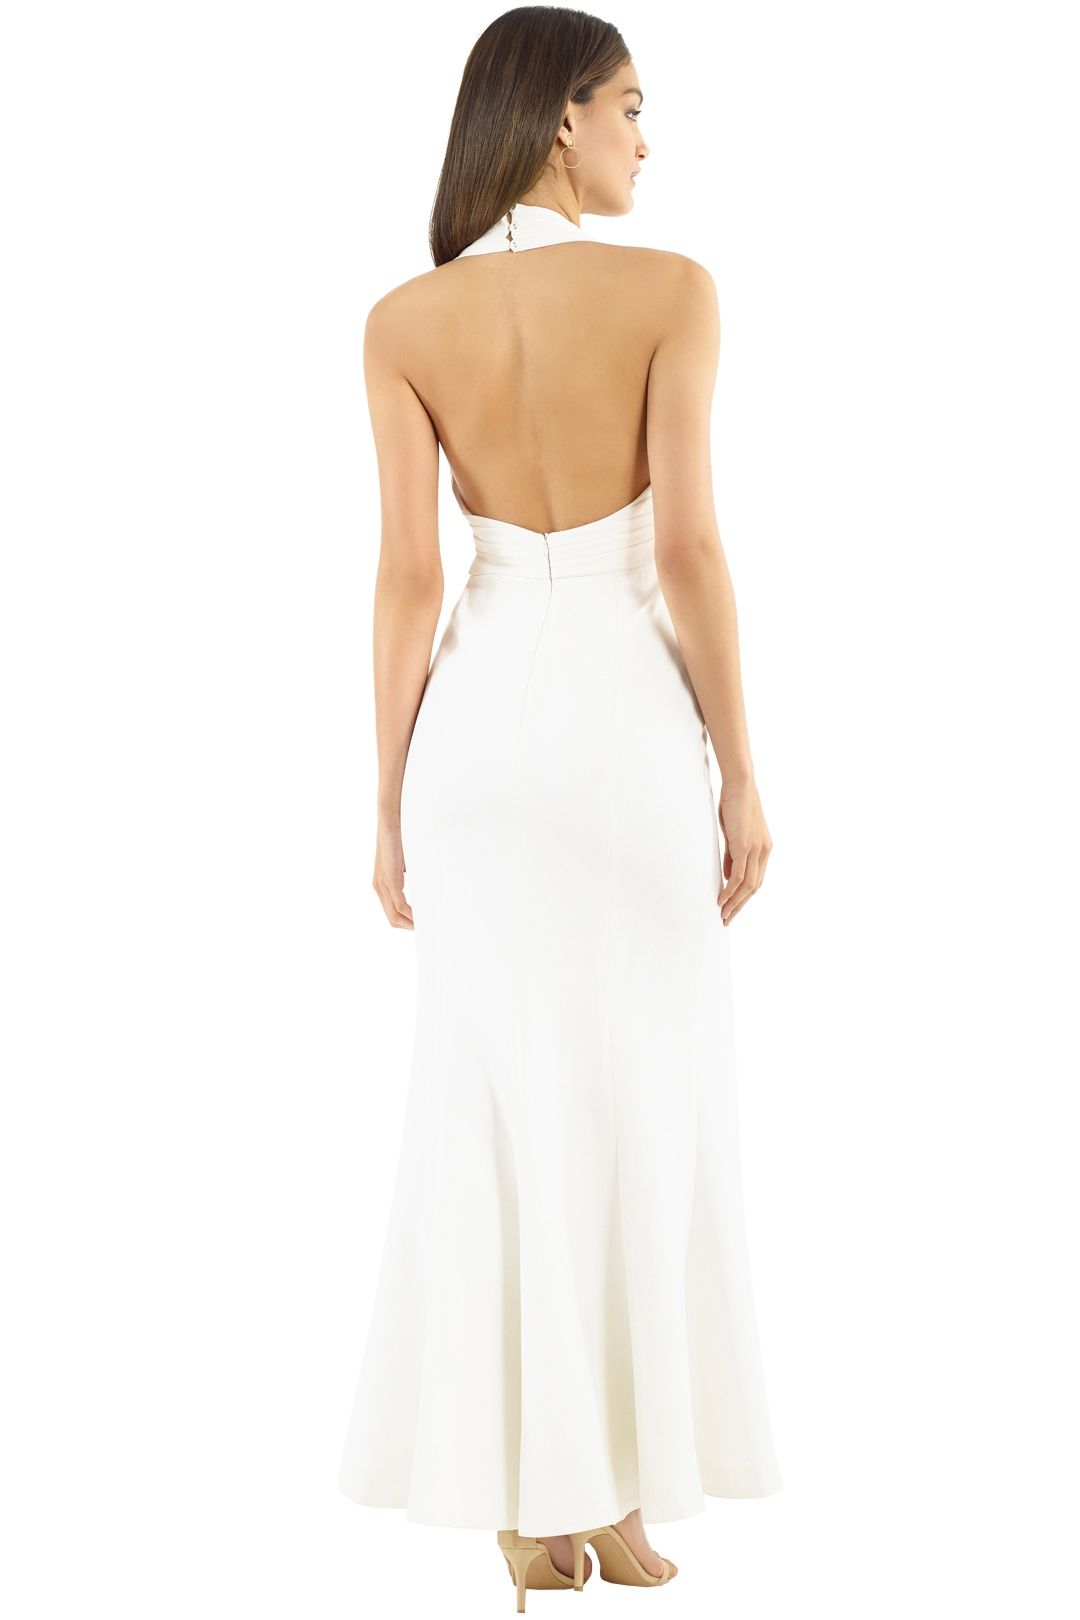 CMEO Collective - Methodical Gown - Ivory - Back